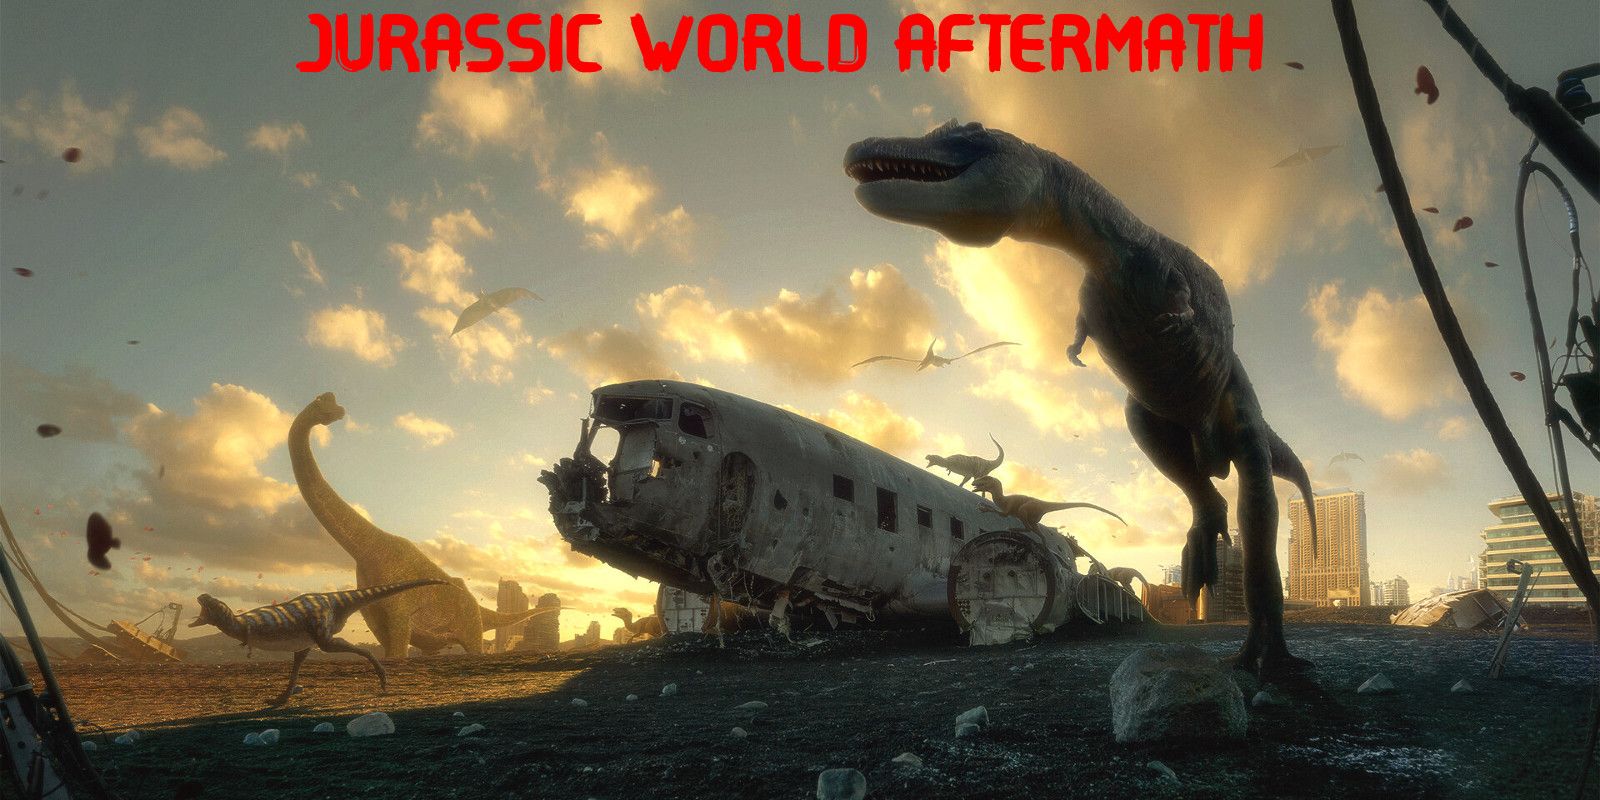 Jurassic World Aftermath Could Be The Survival Game We Never Got